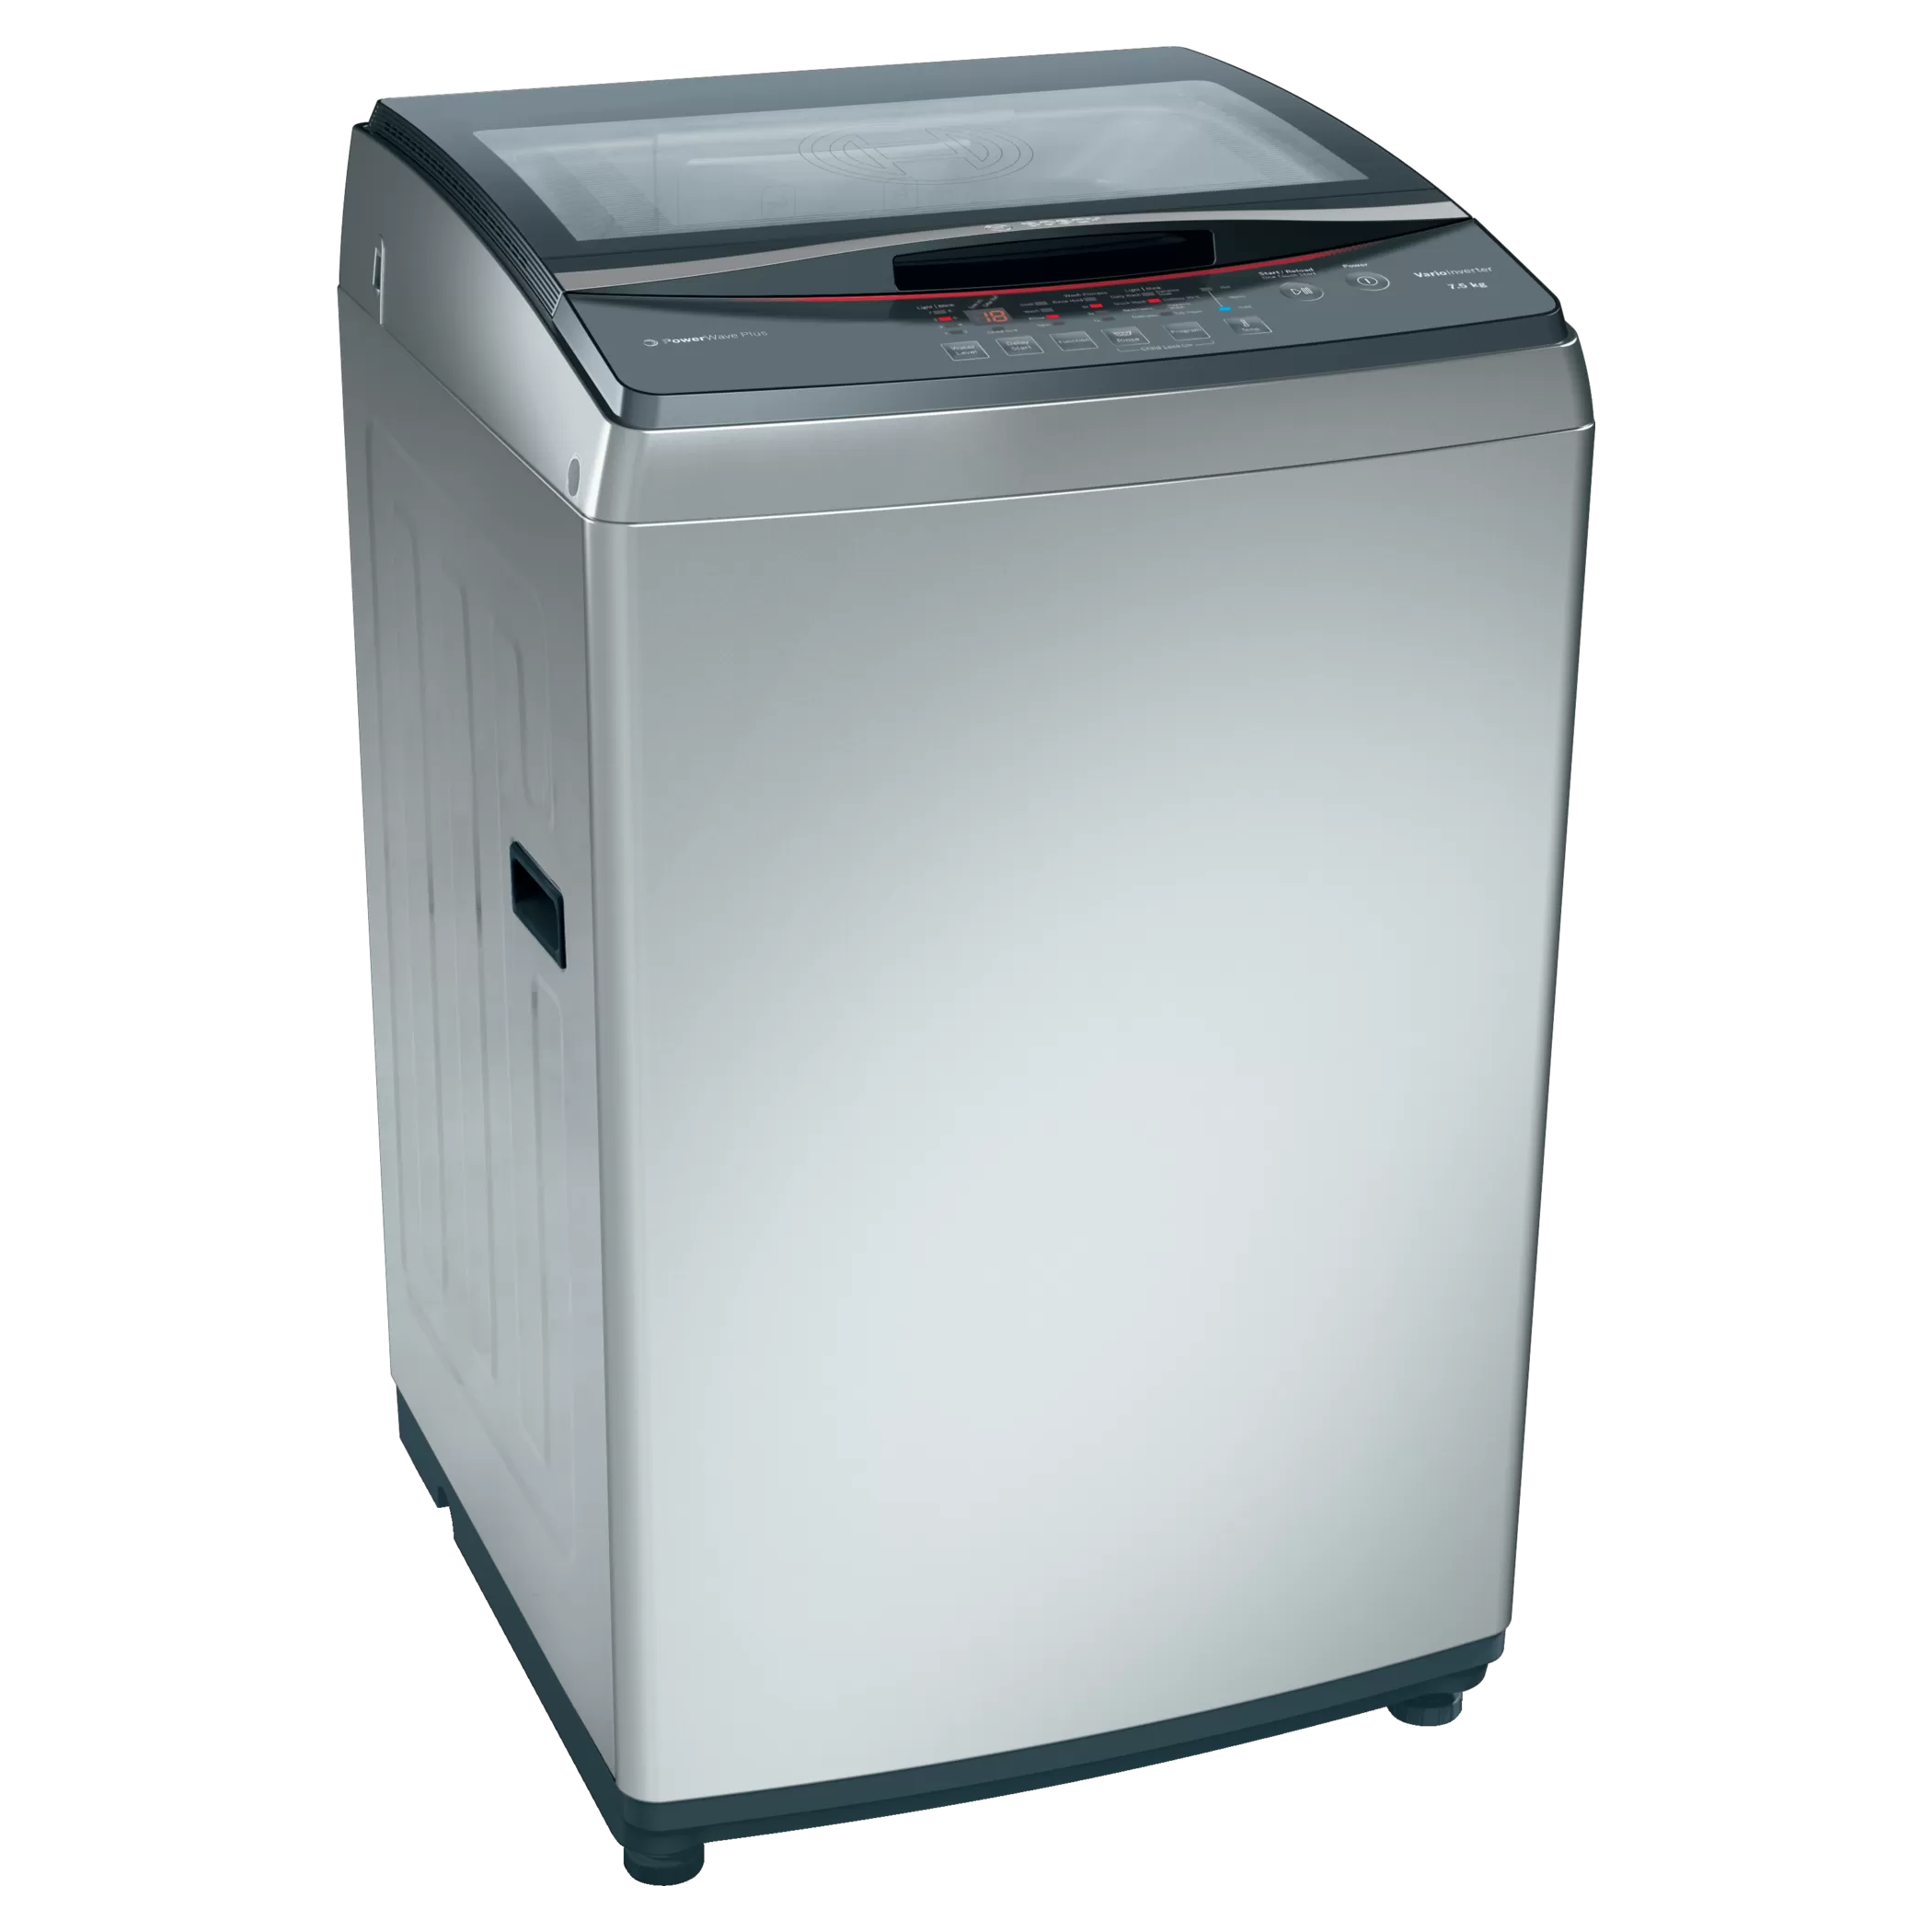 Bosch Serie 4 7.5 kg Fully Automatic Top Load Washing Machine (WOA752S1IN, Silver)_1